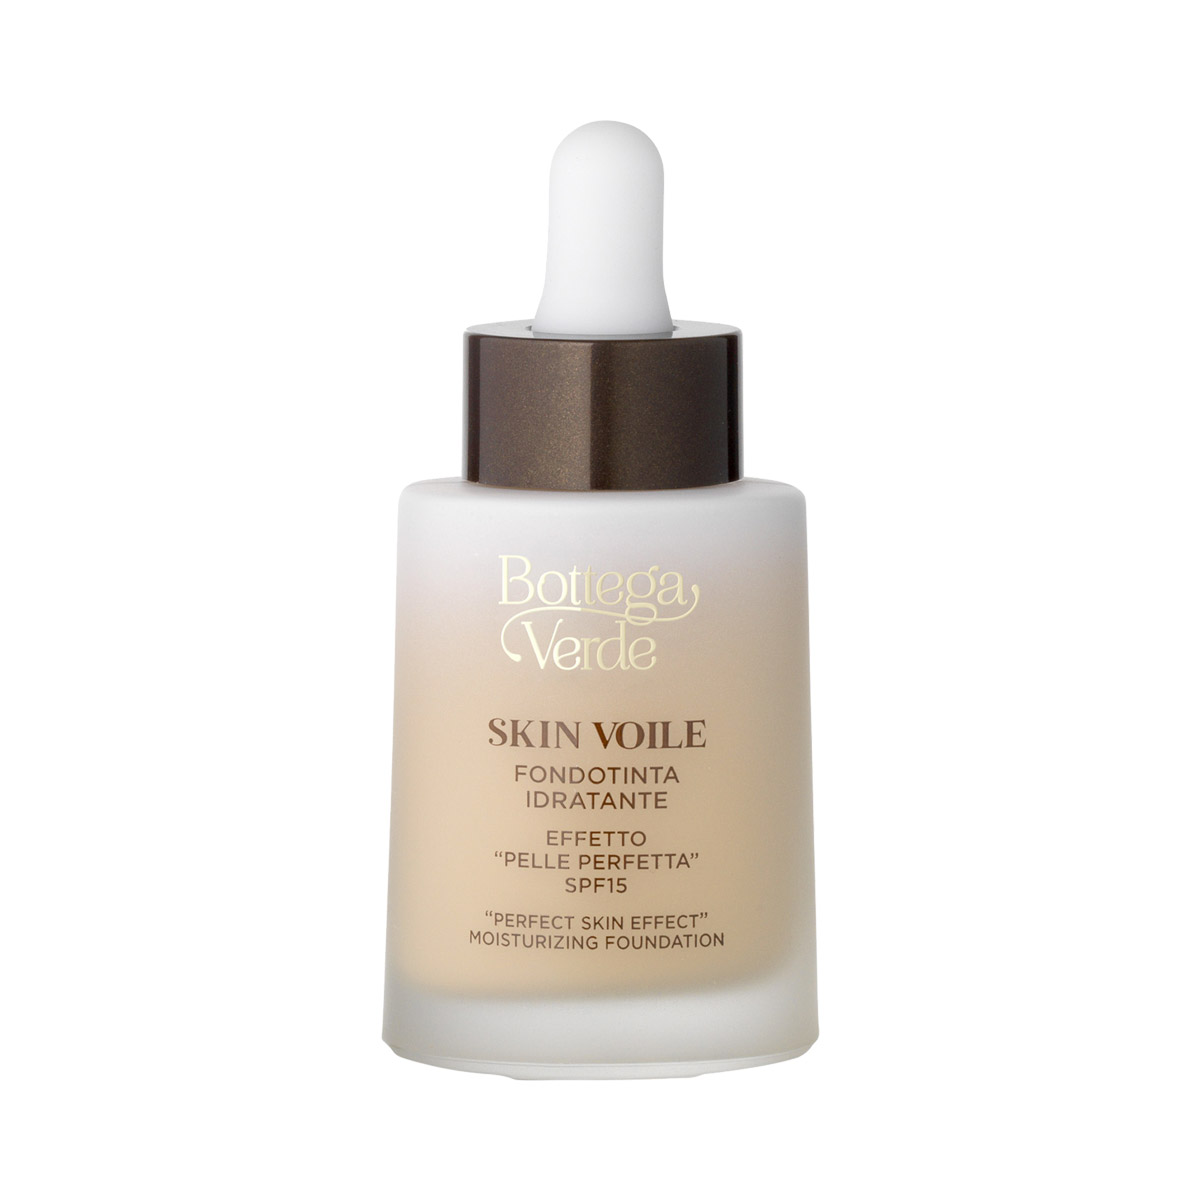 Skin Voile ¿Perfect Skin Effect¿ Moisturizing Foundation with Hyaluronic Acid and Viola Tricolor, SPF15 (25 ml)